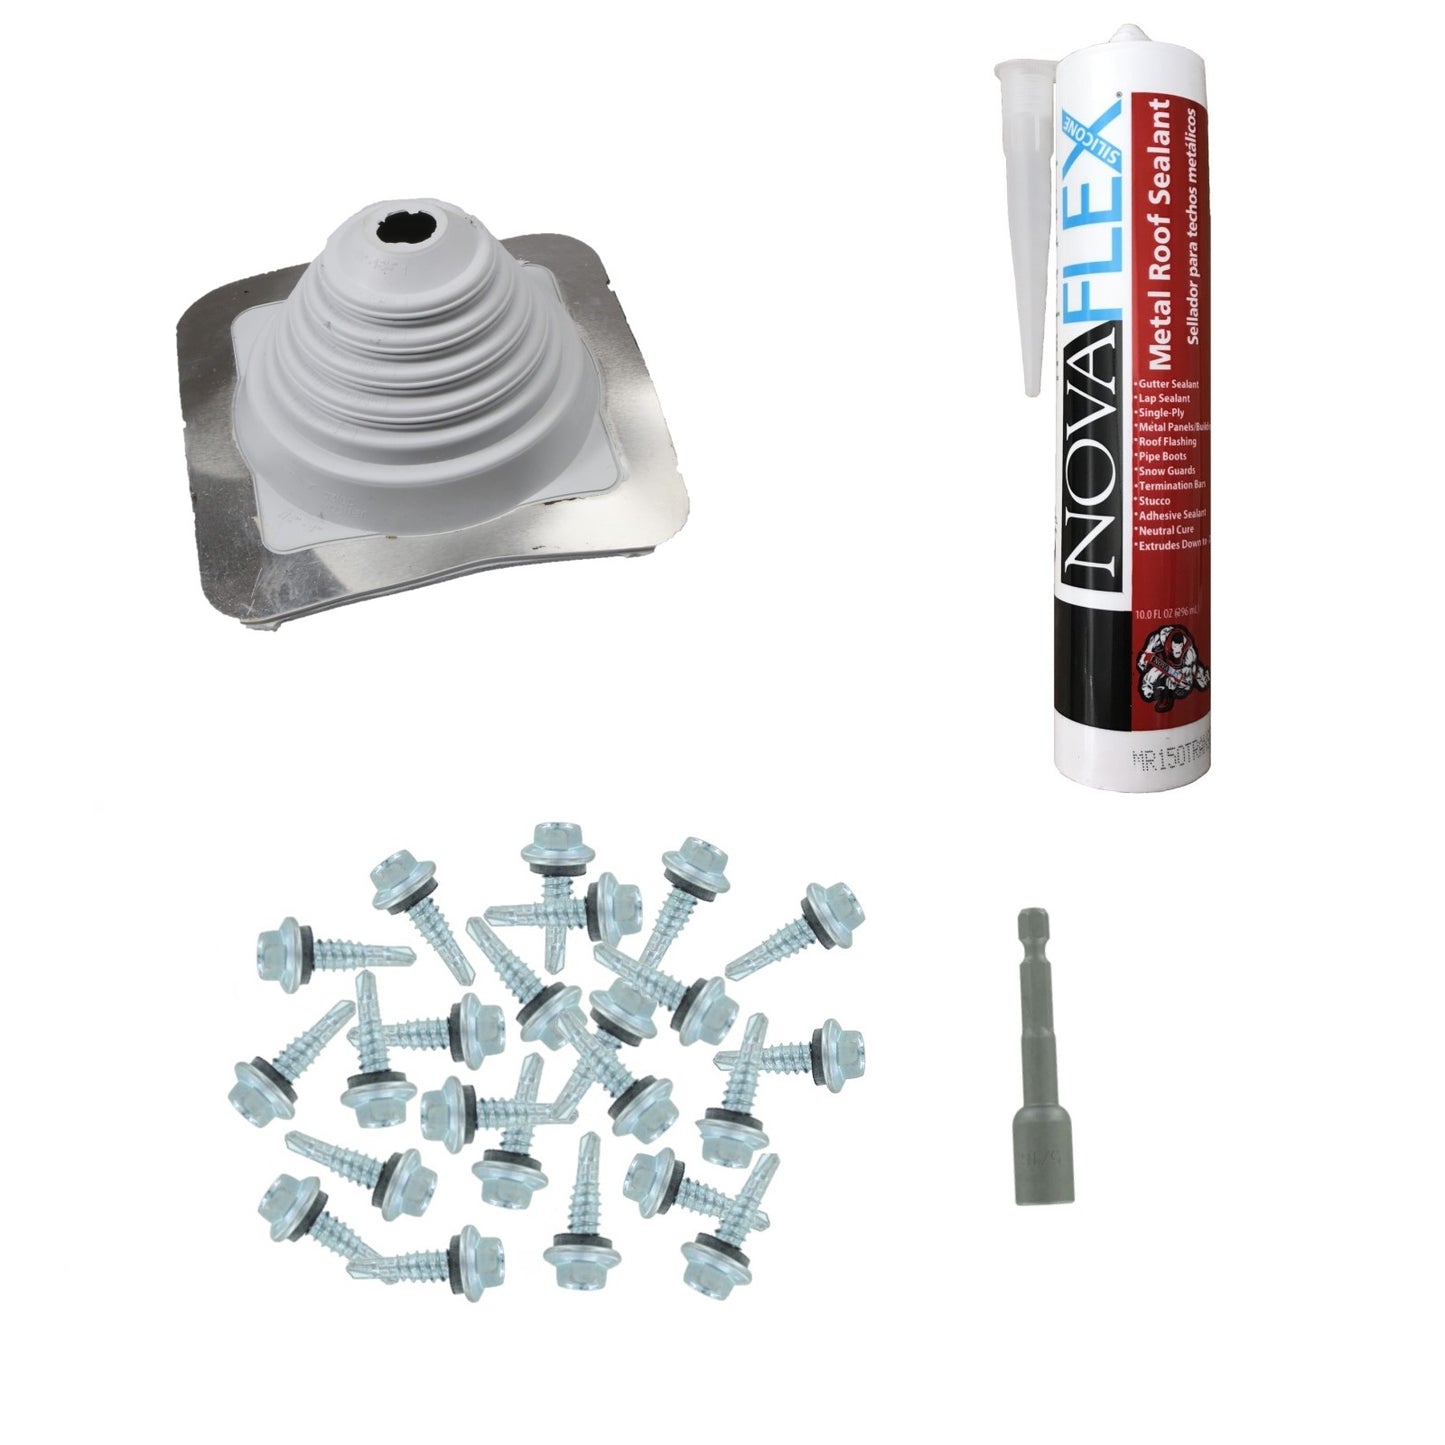 #2 Square EPDM Metal Roof Pipe Boot wInstall Kit Gray